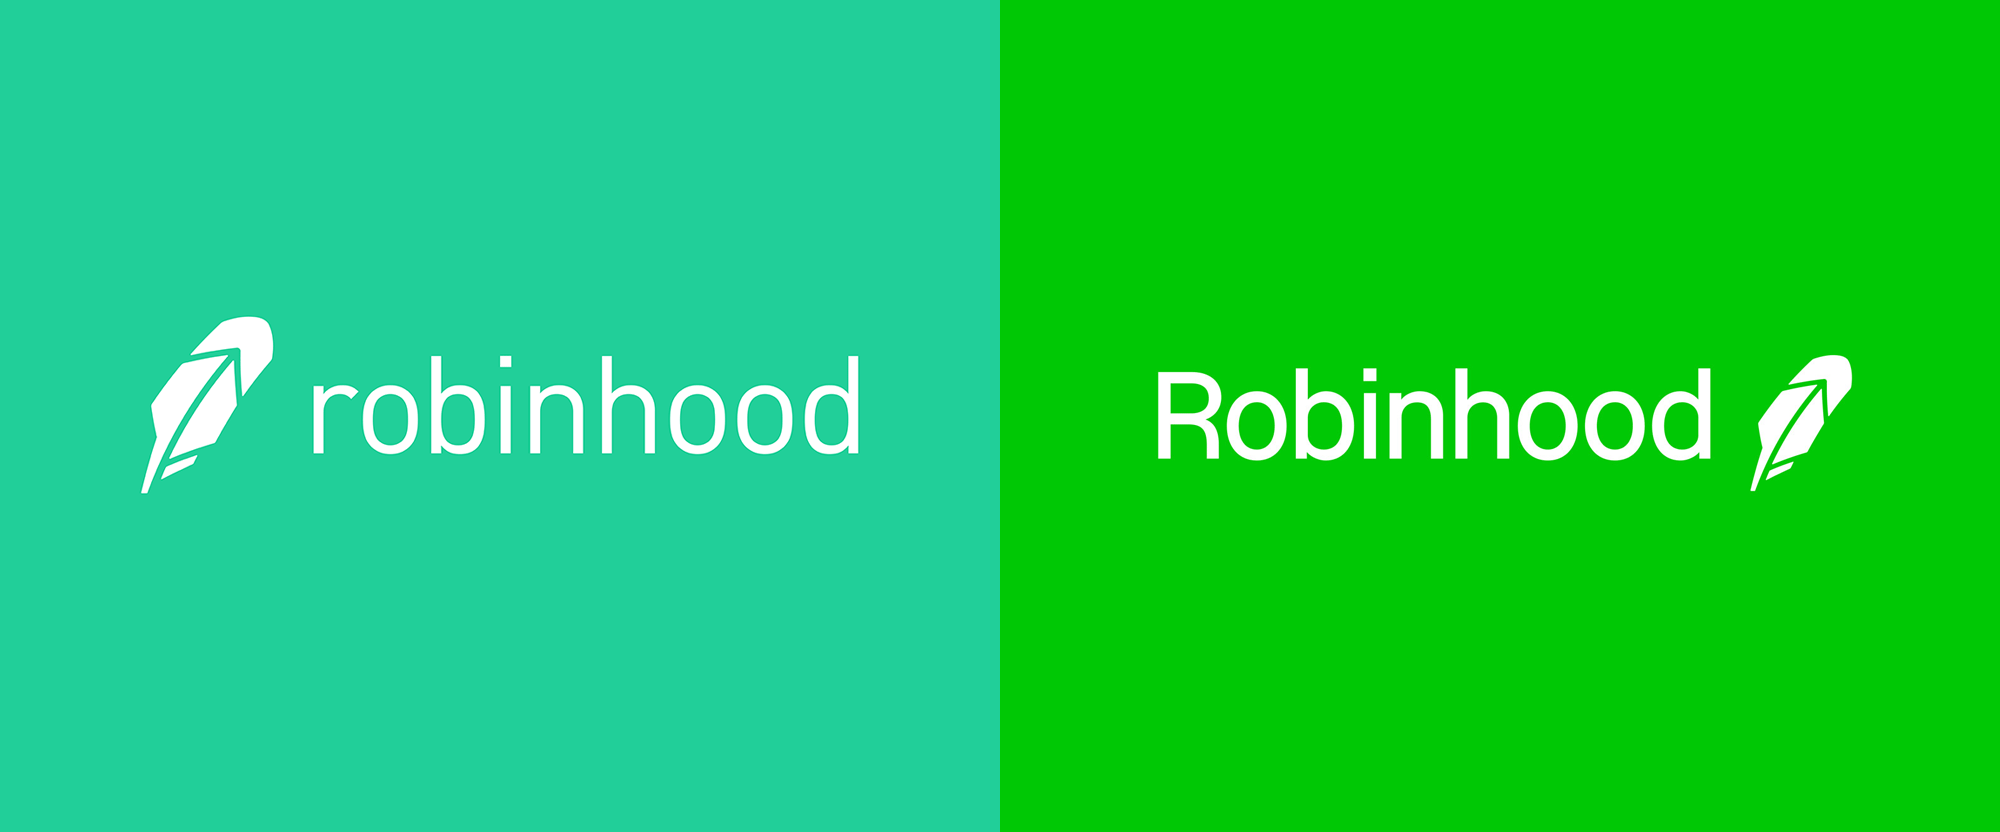 Brand New: New Logo and Identity for Robinhood by COLLINS